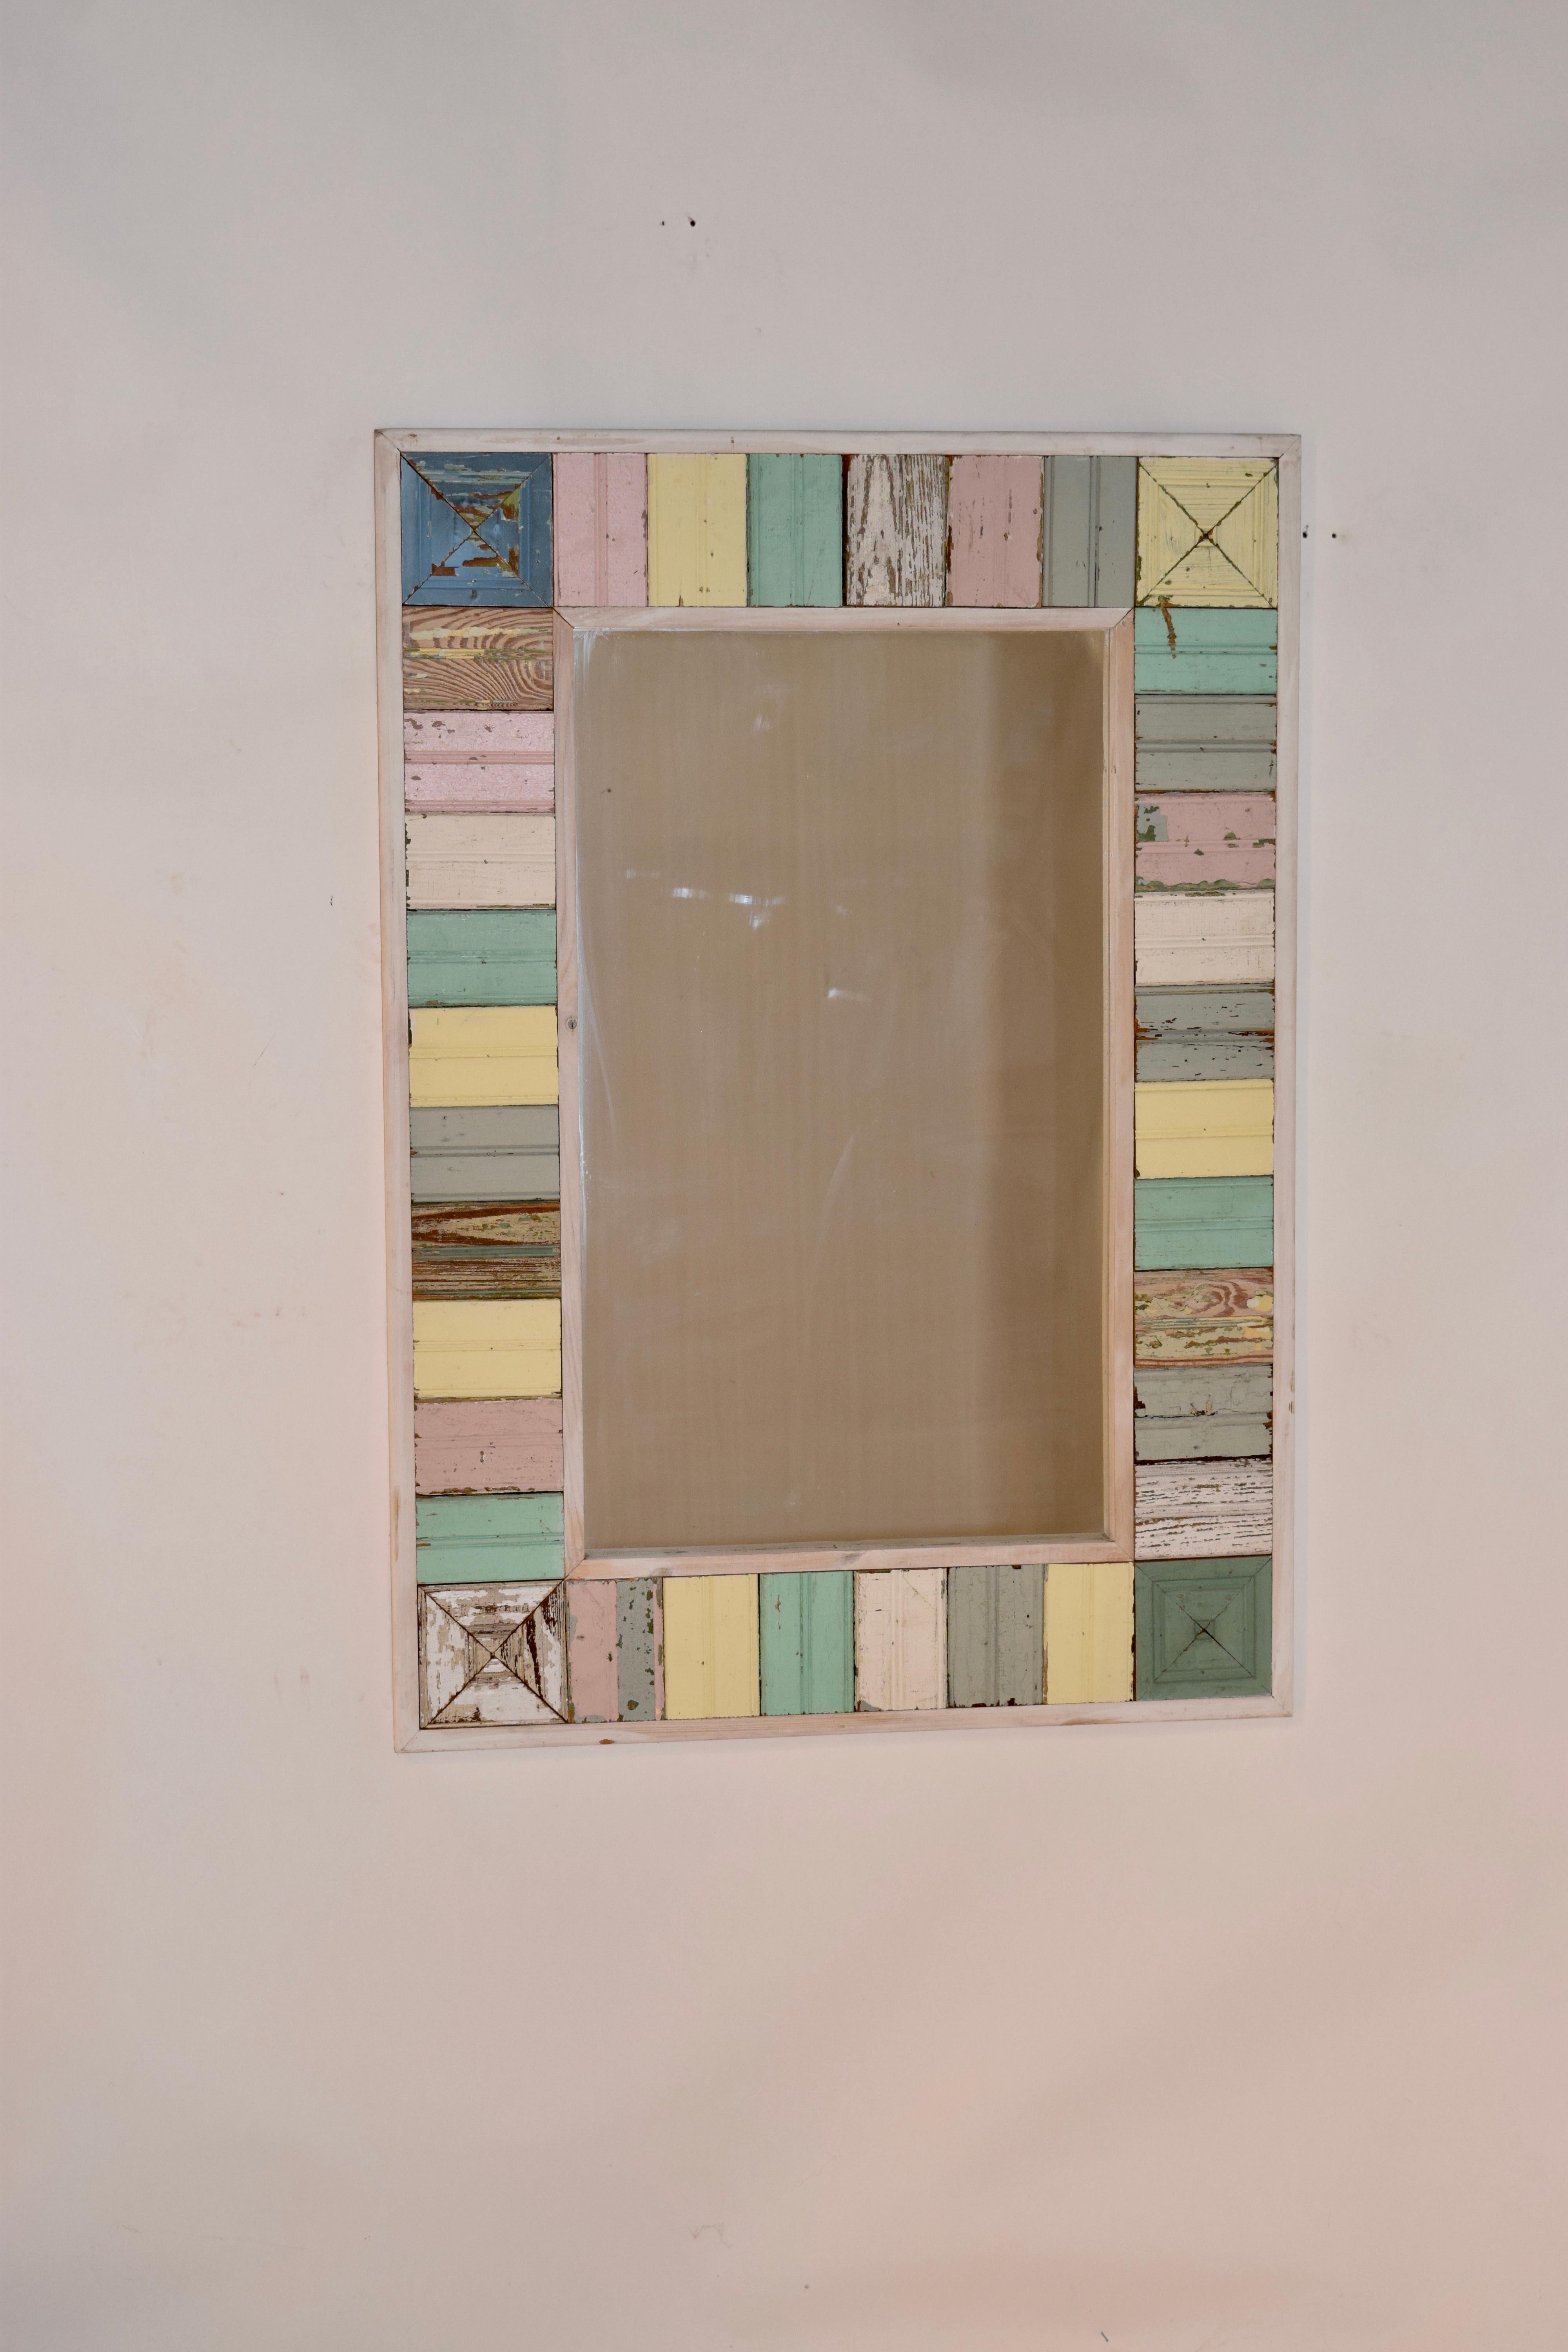 Vintage mirror made from pieces of vintage bead board with original paint finish. The frame was built later to accommodate the barn wood. Plate glass mirror.